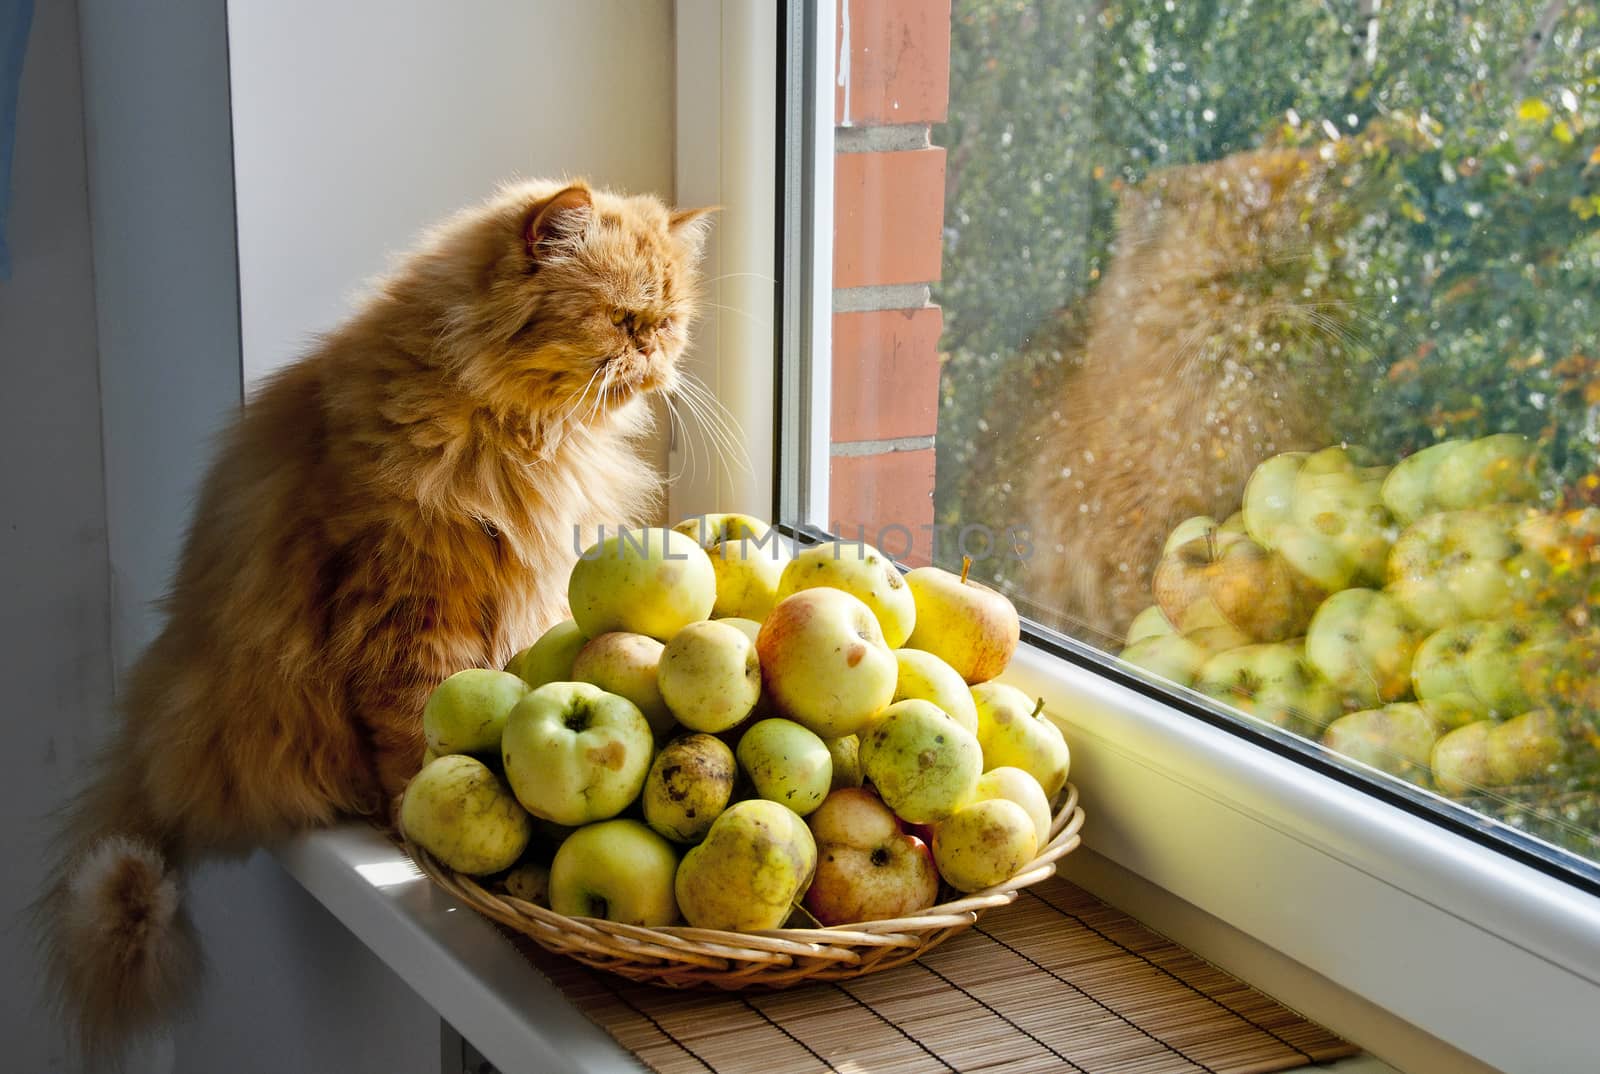 Red cat with apples looks out window by infinityyy